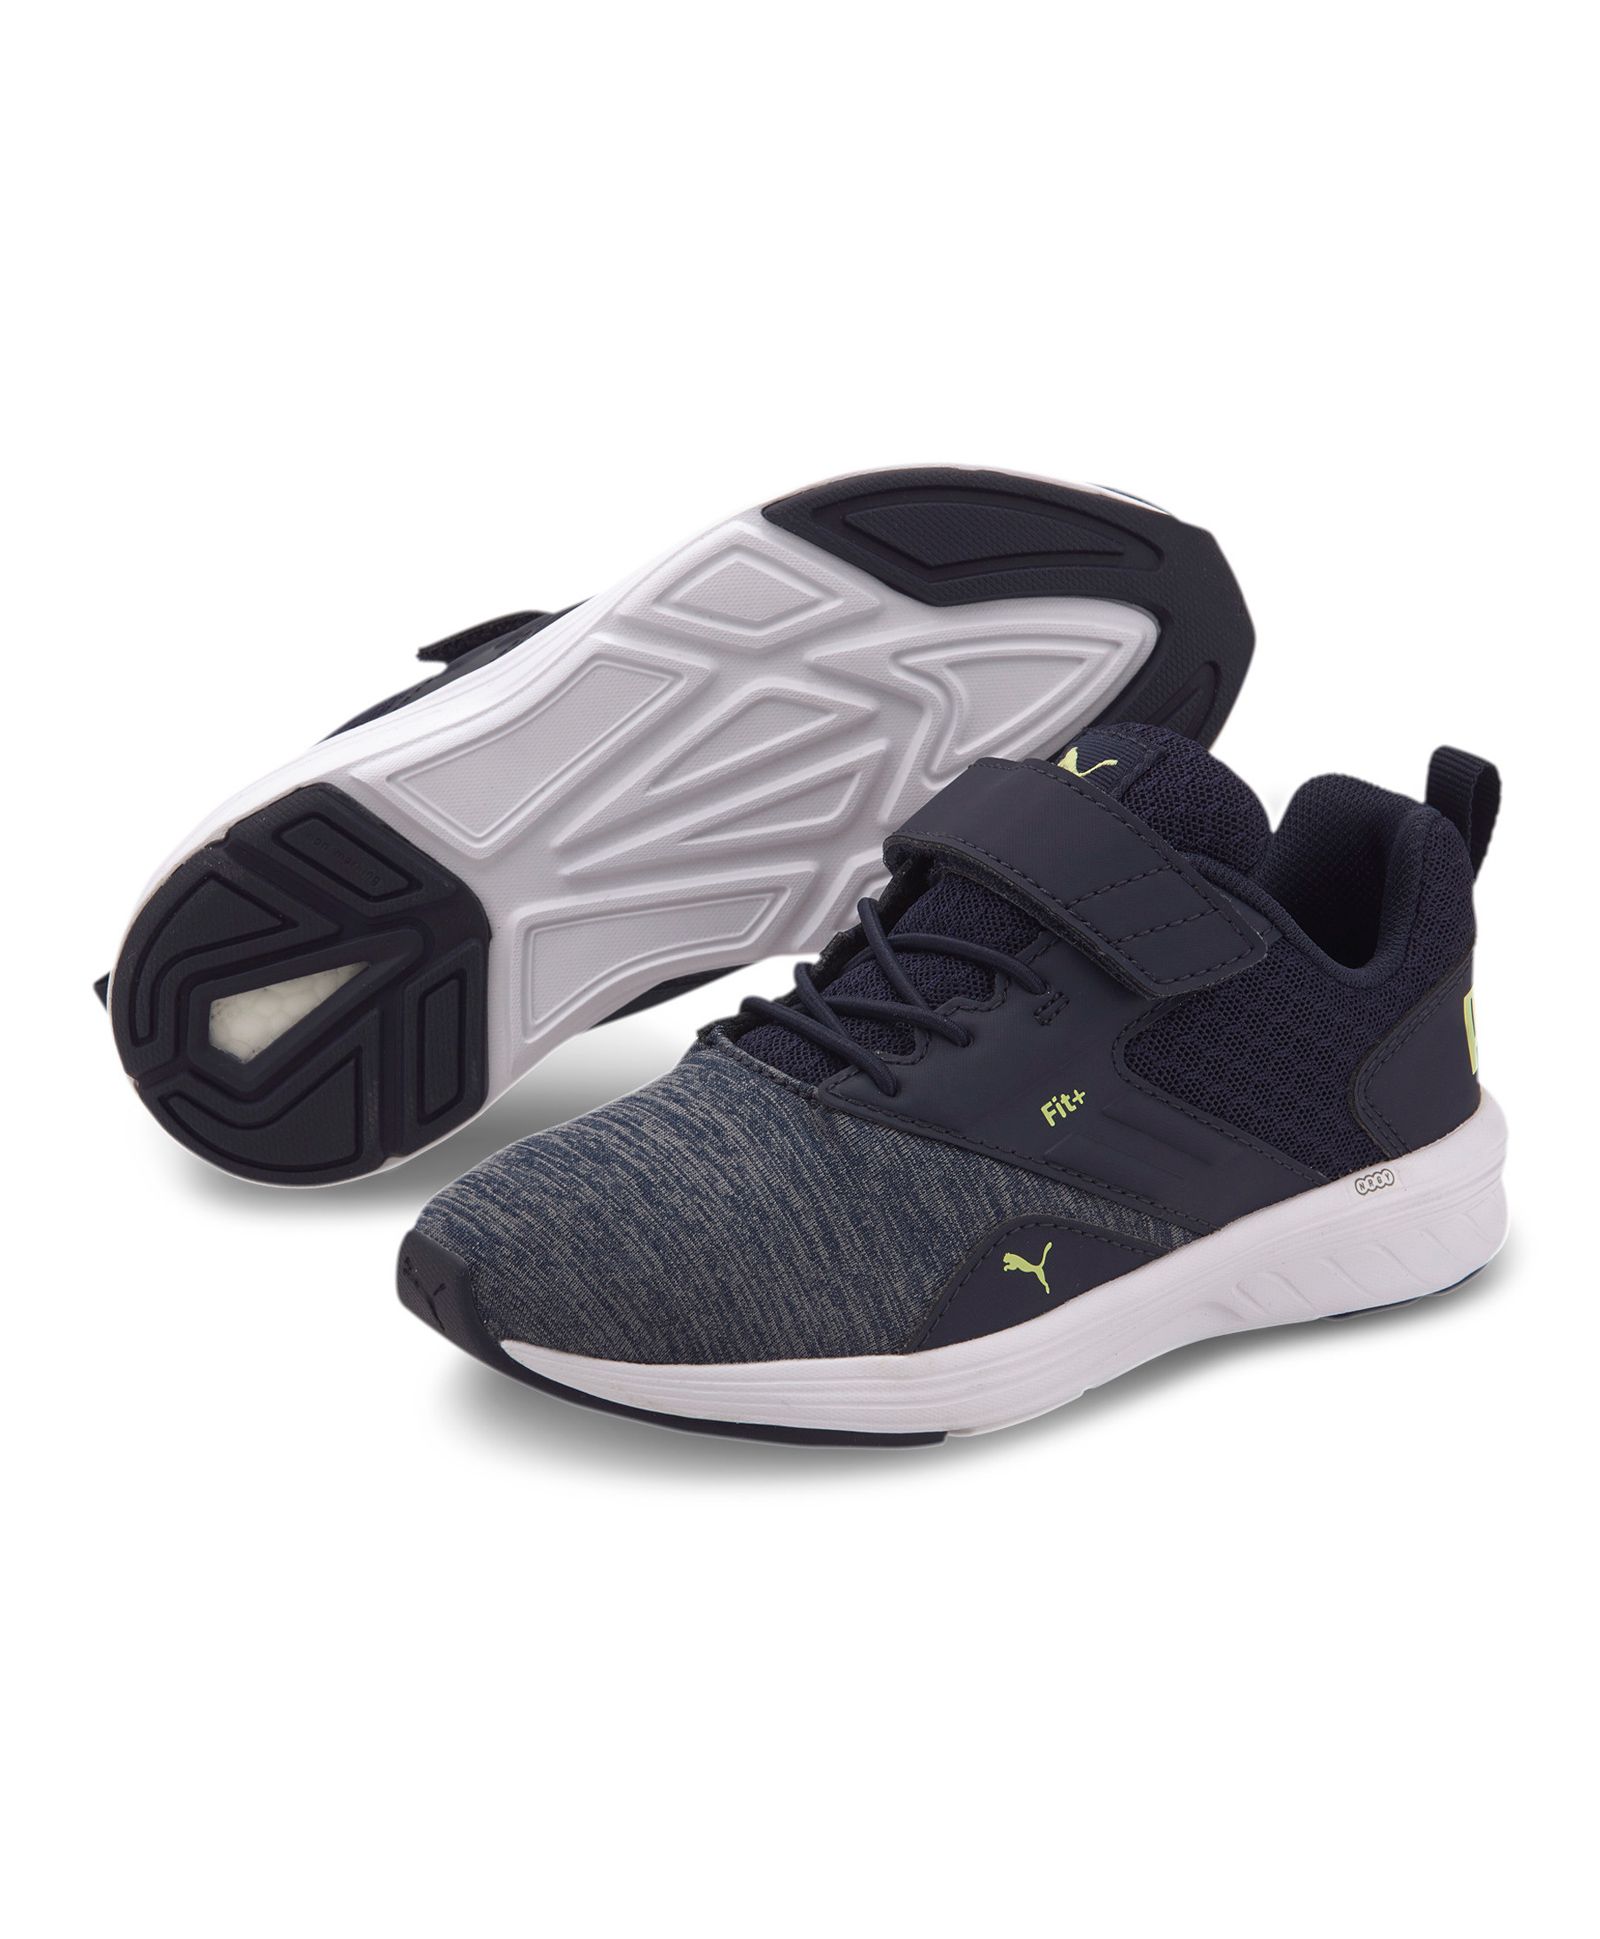 Undskyld mig Rullesten industrialisere Buy PUMA Nrgy Comet V Ps Shoes - Grey for Both (6-7 Years) Online, Shop at  FirstCry.com - 8975770